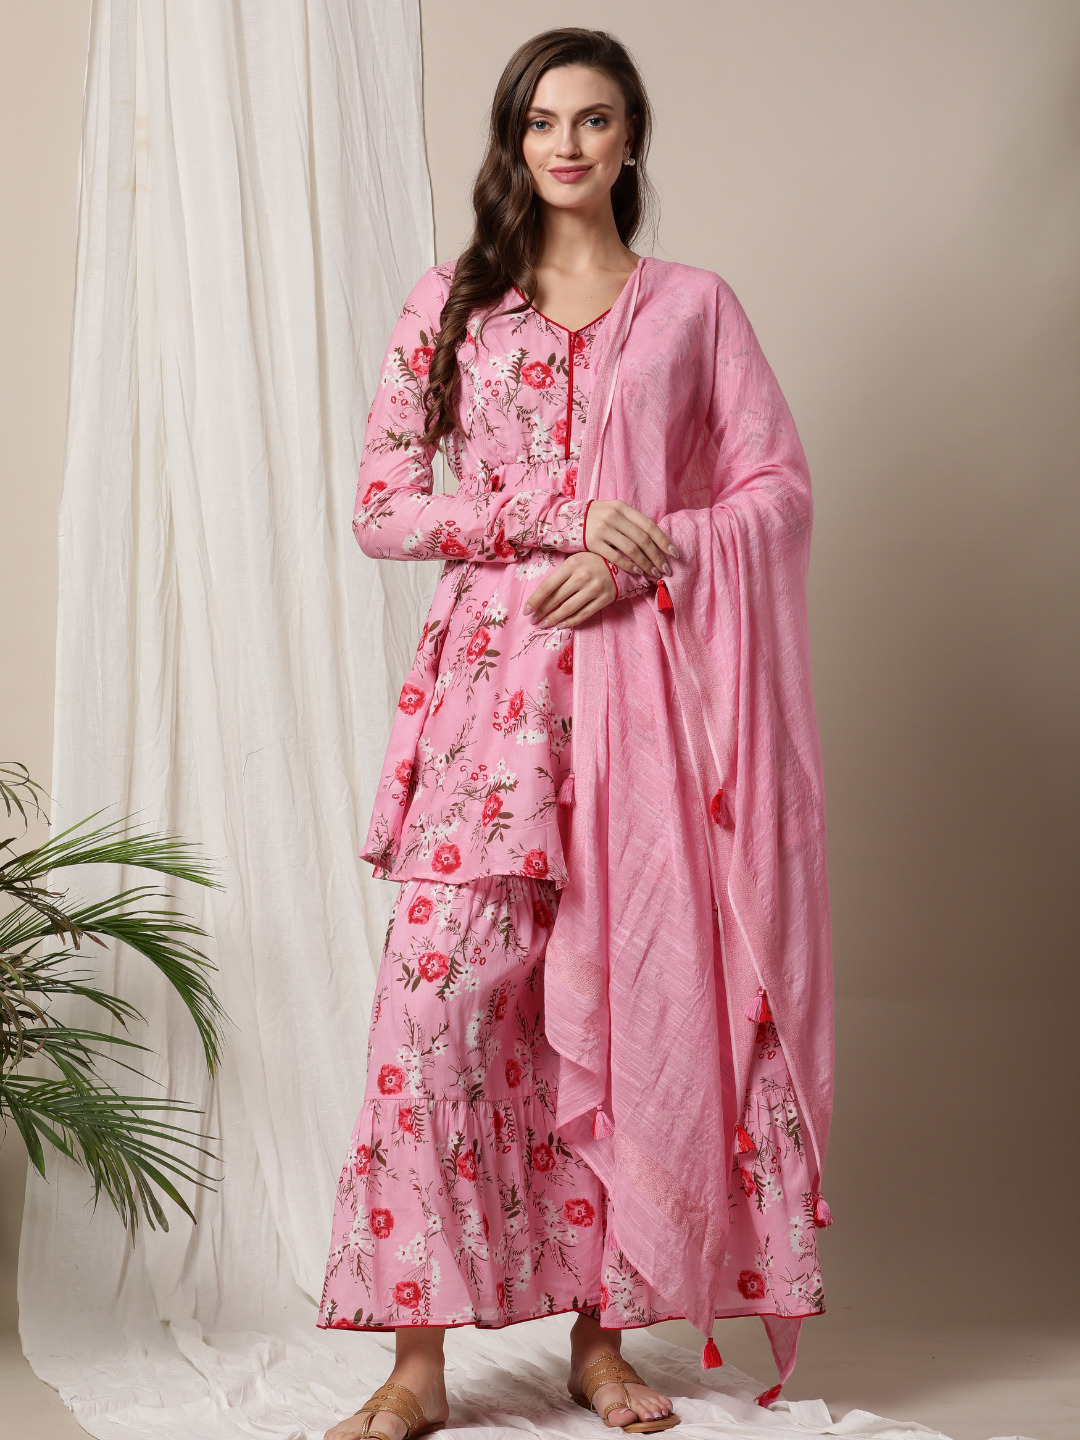 LUXE Sweet Peach Georgette Floral Sharara Suit Set | Indian dresses online, Sharara  suit, Sharara